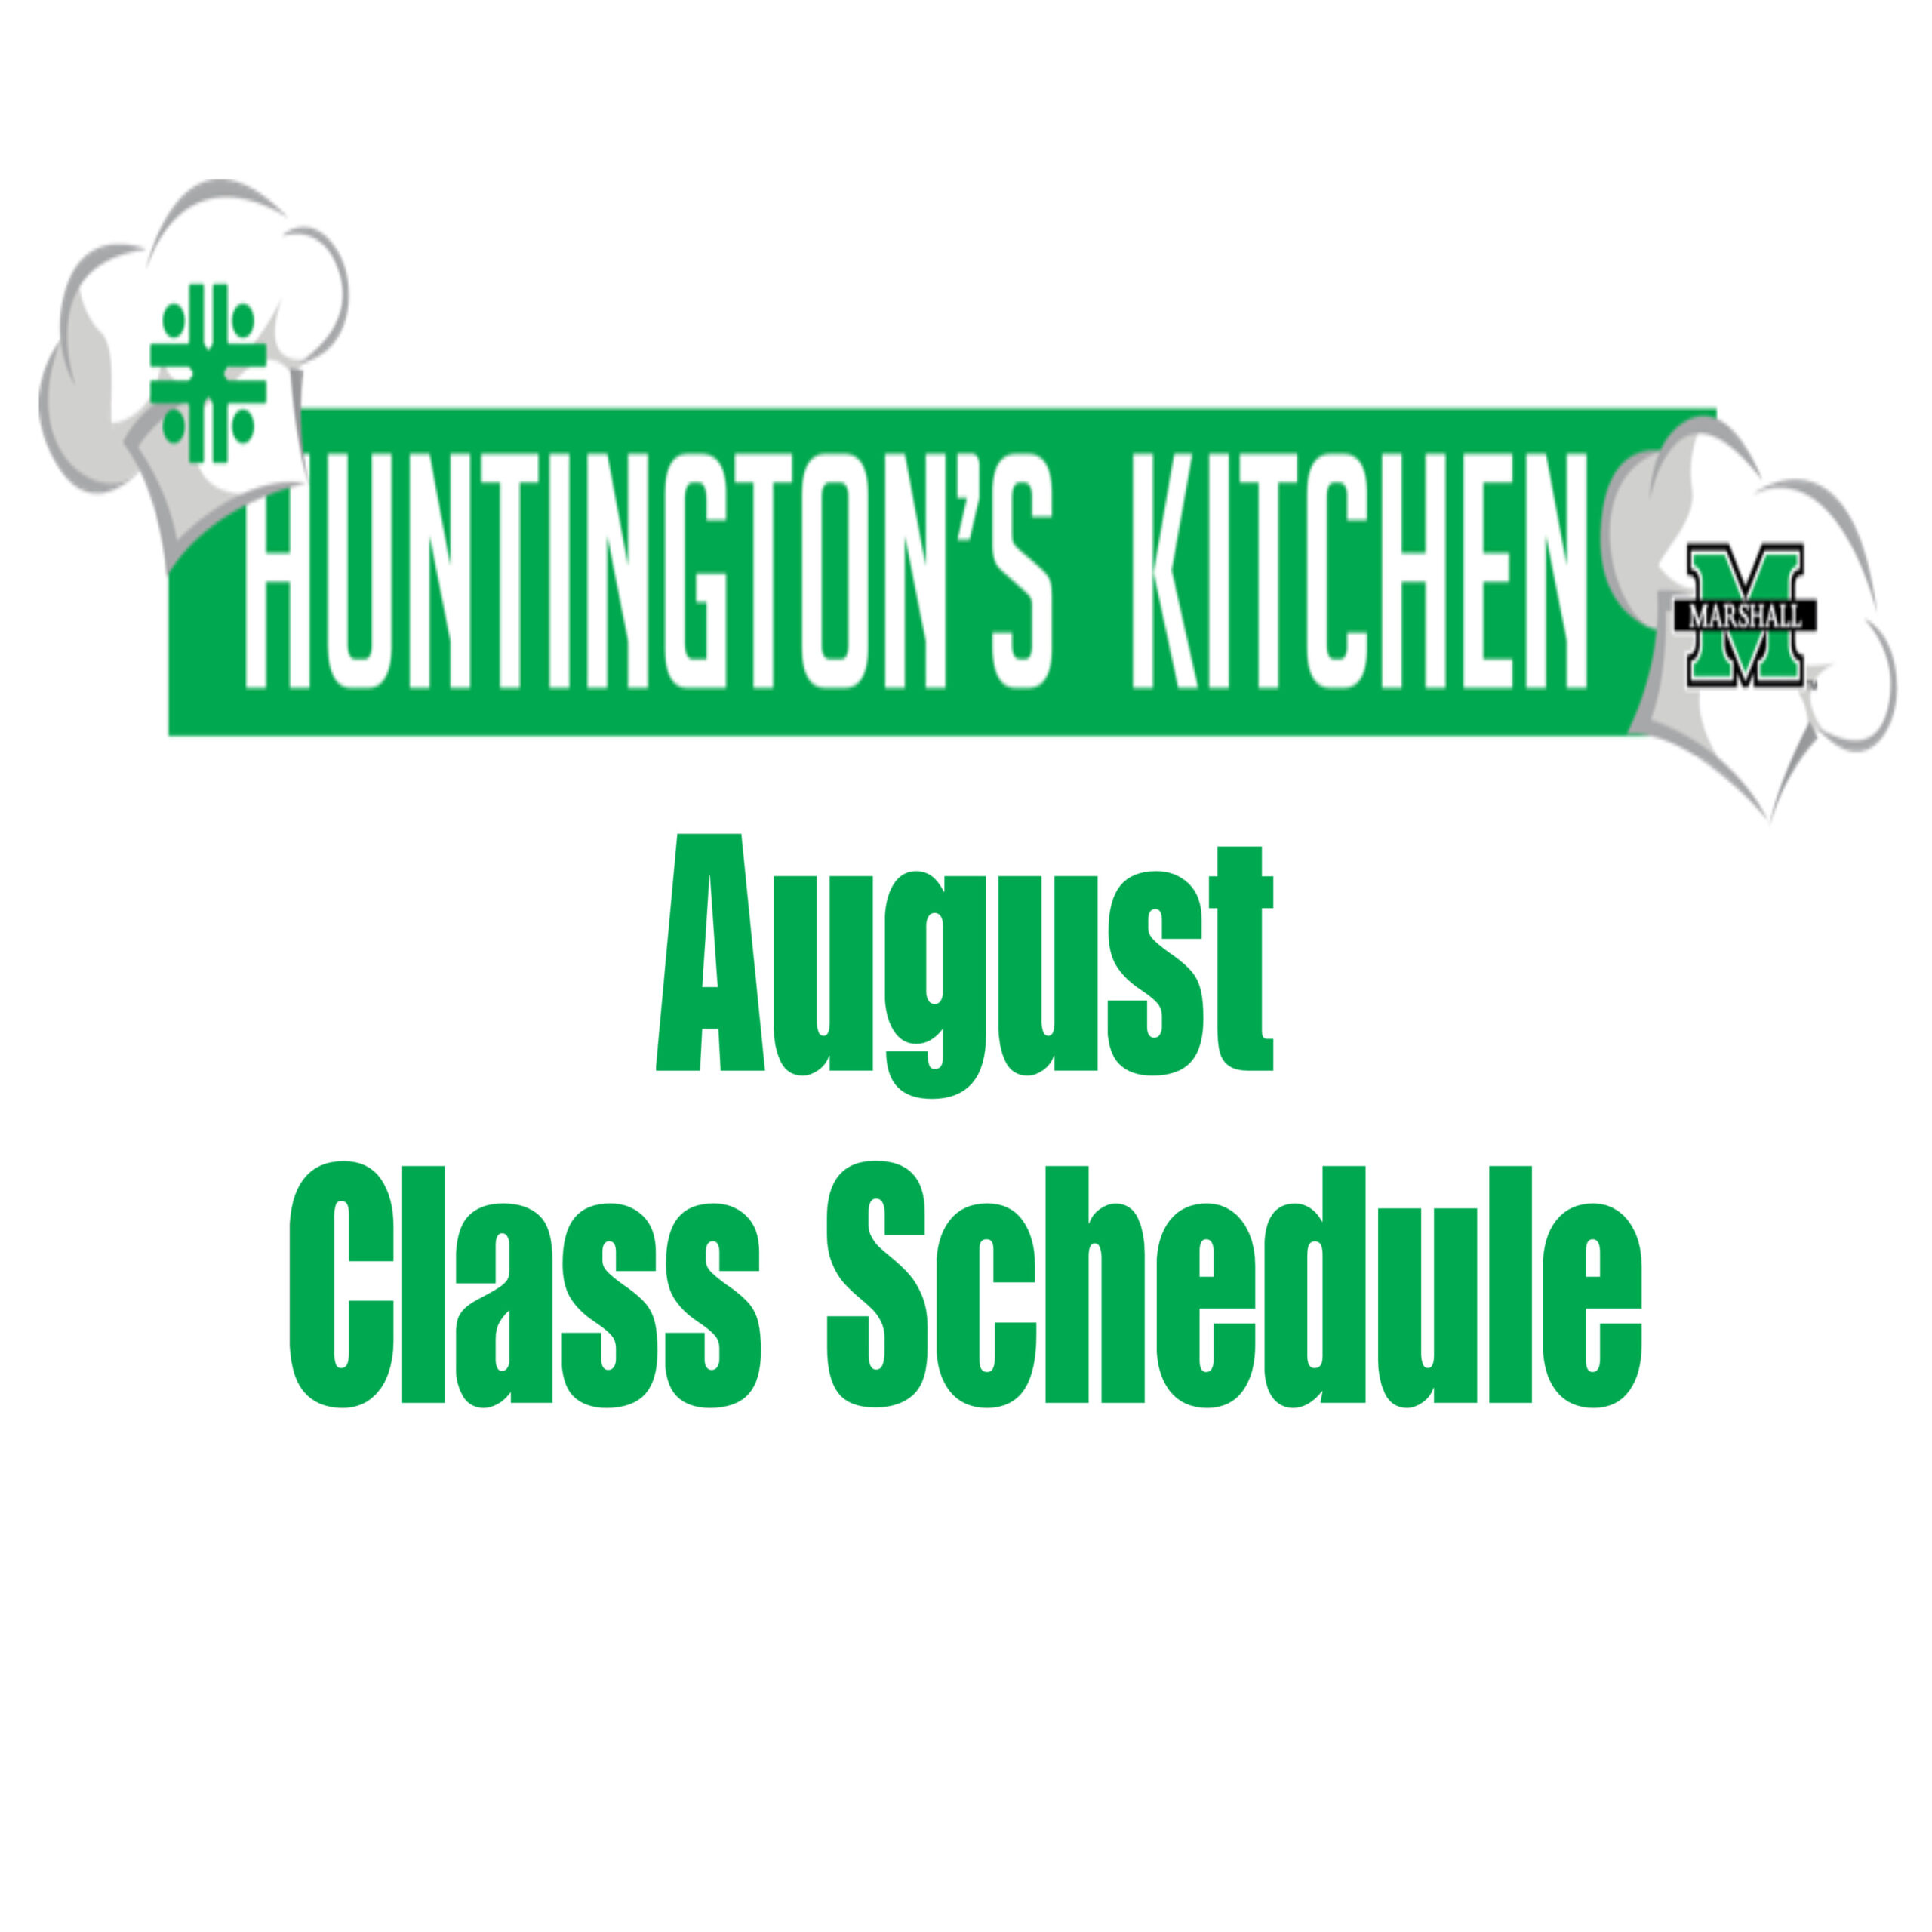 cabell huntington hospital august class schedule